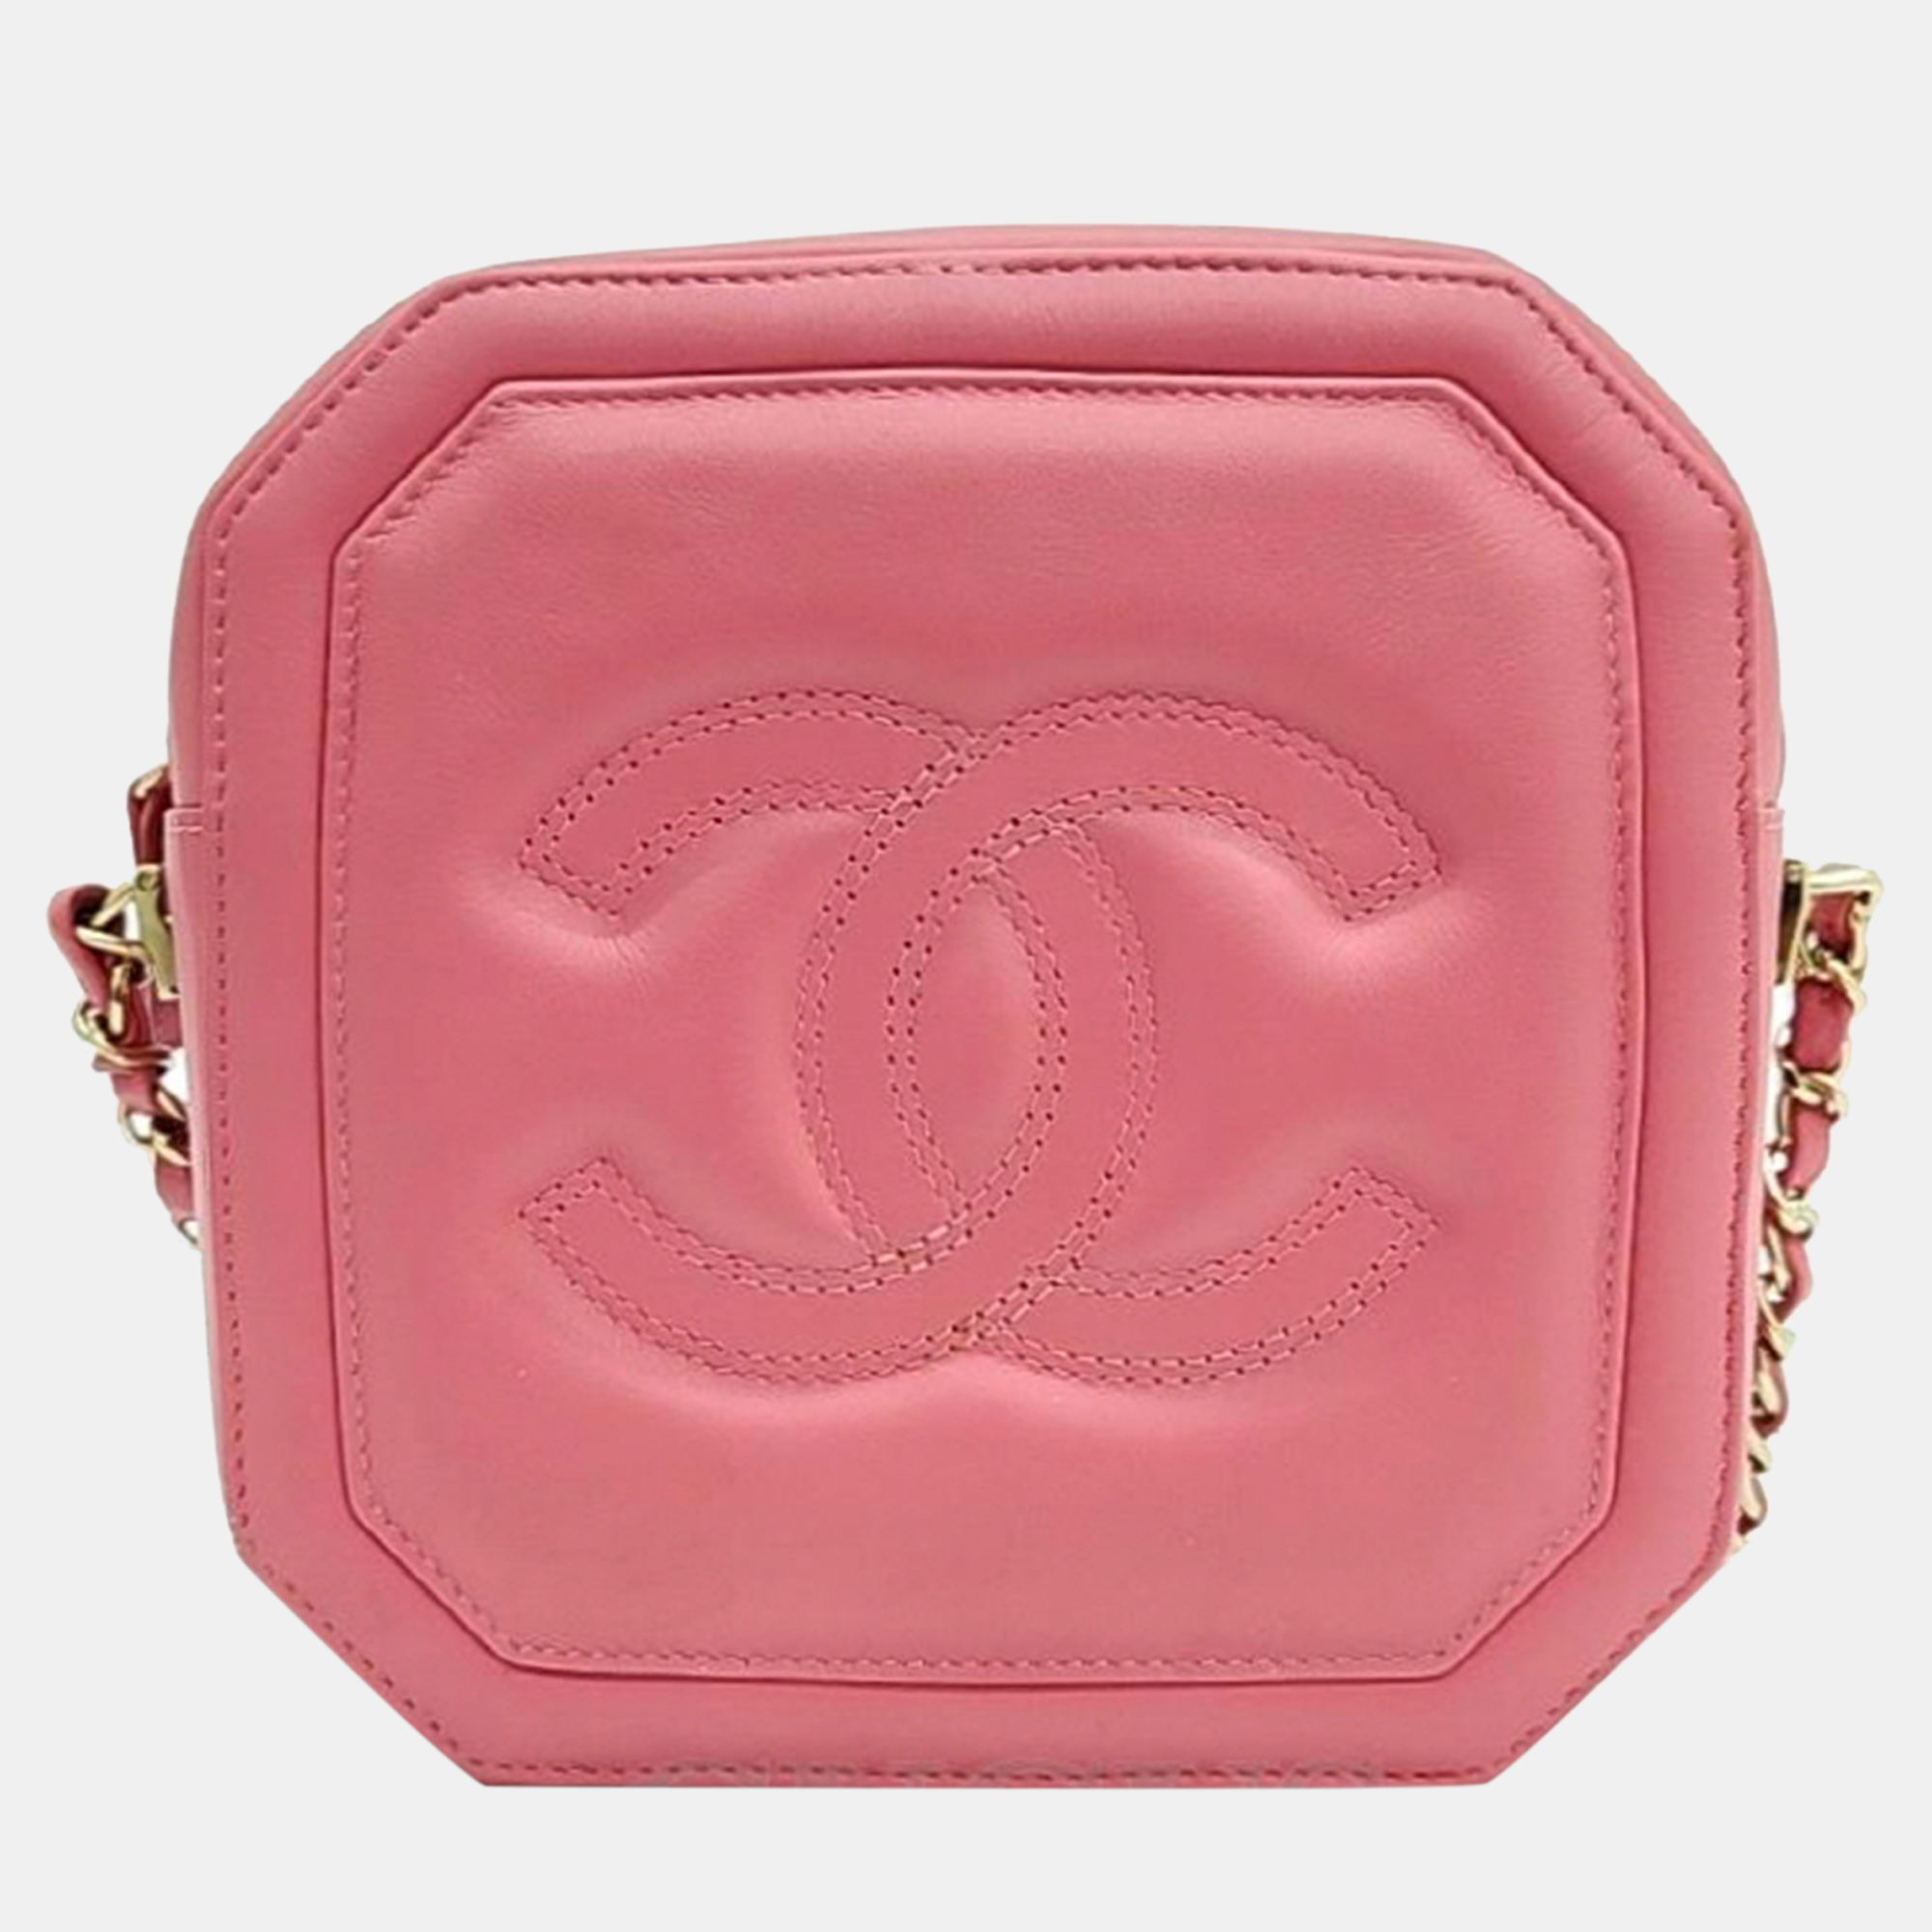 Crafted with precision this Chanel crossbody bag combines luxurious materials with impeccable design ensuring you make a sophisticated statement wherever you go. Invest in it today.